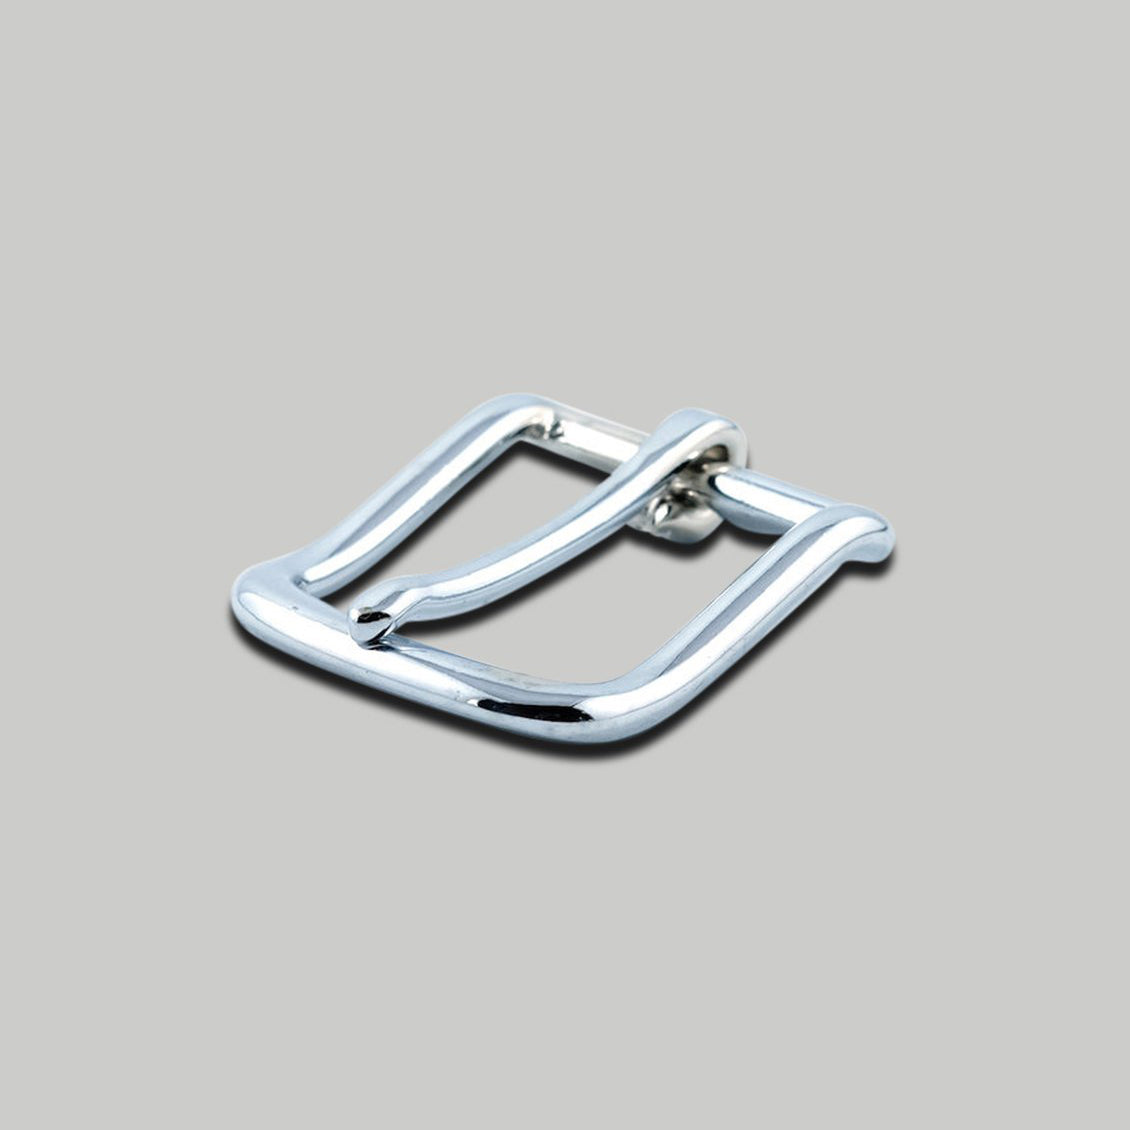 Harness Buckle / 6 sizes / 2 colours